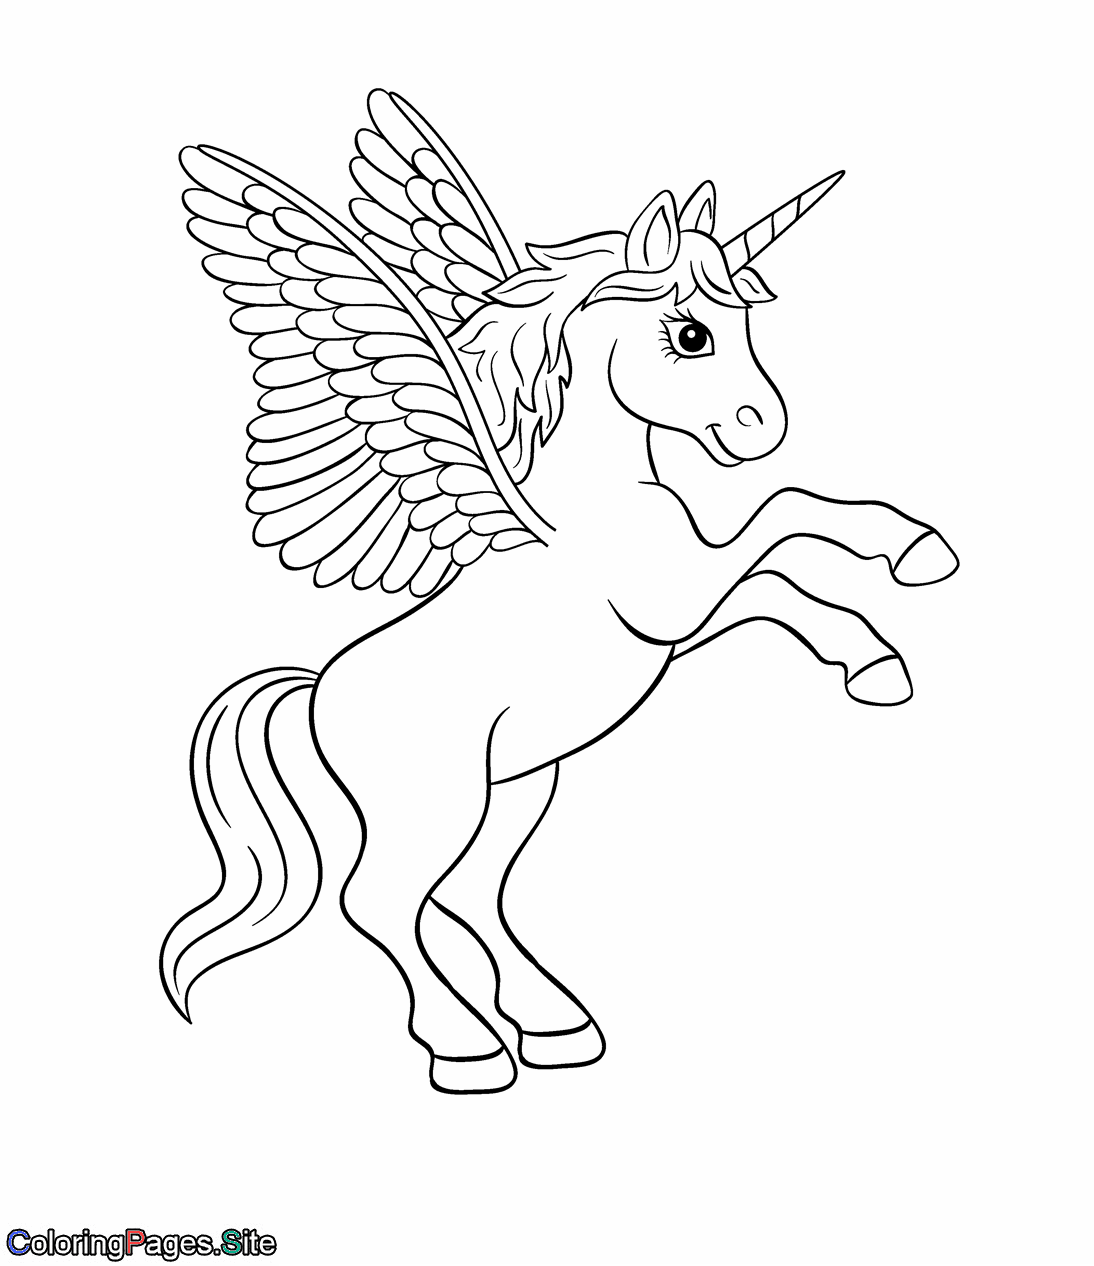 Wings unicorn coloring page | Unicorn coloring pages, Horse coloring pages,  Unicorn pictures to color